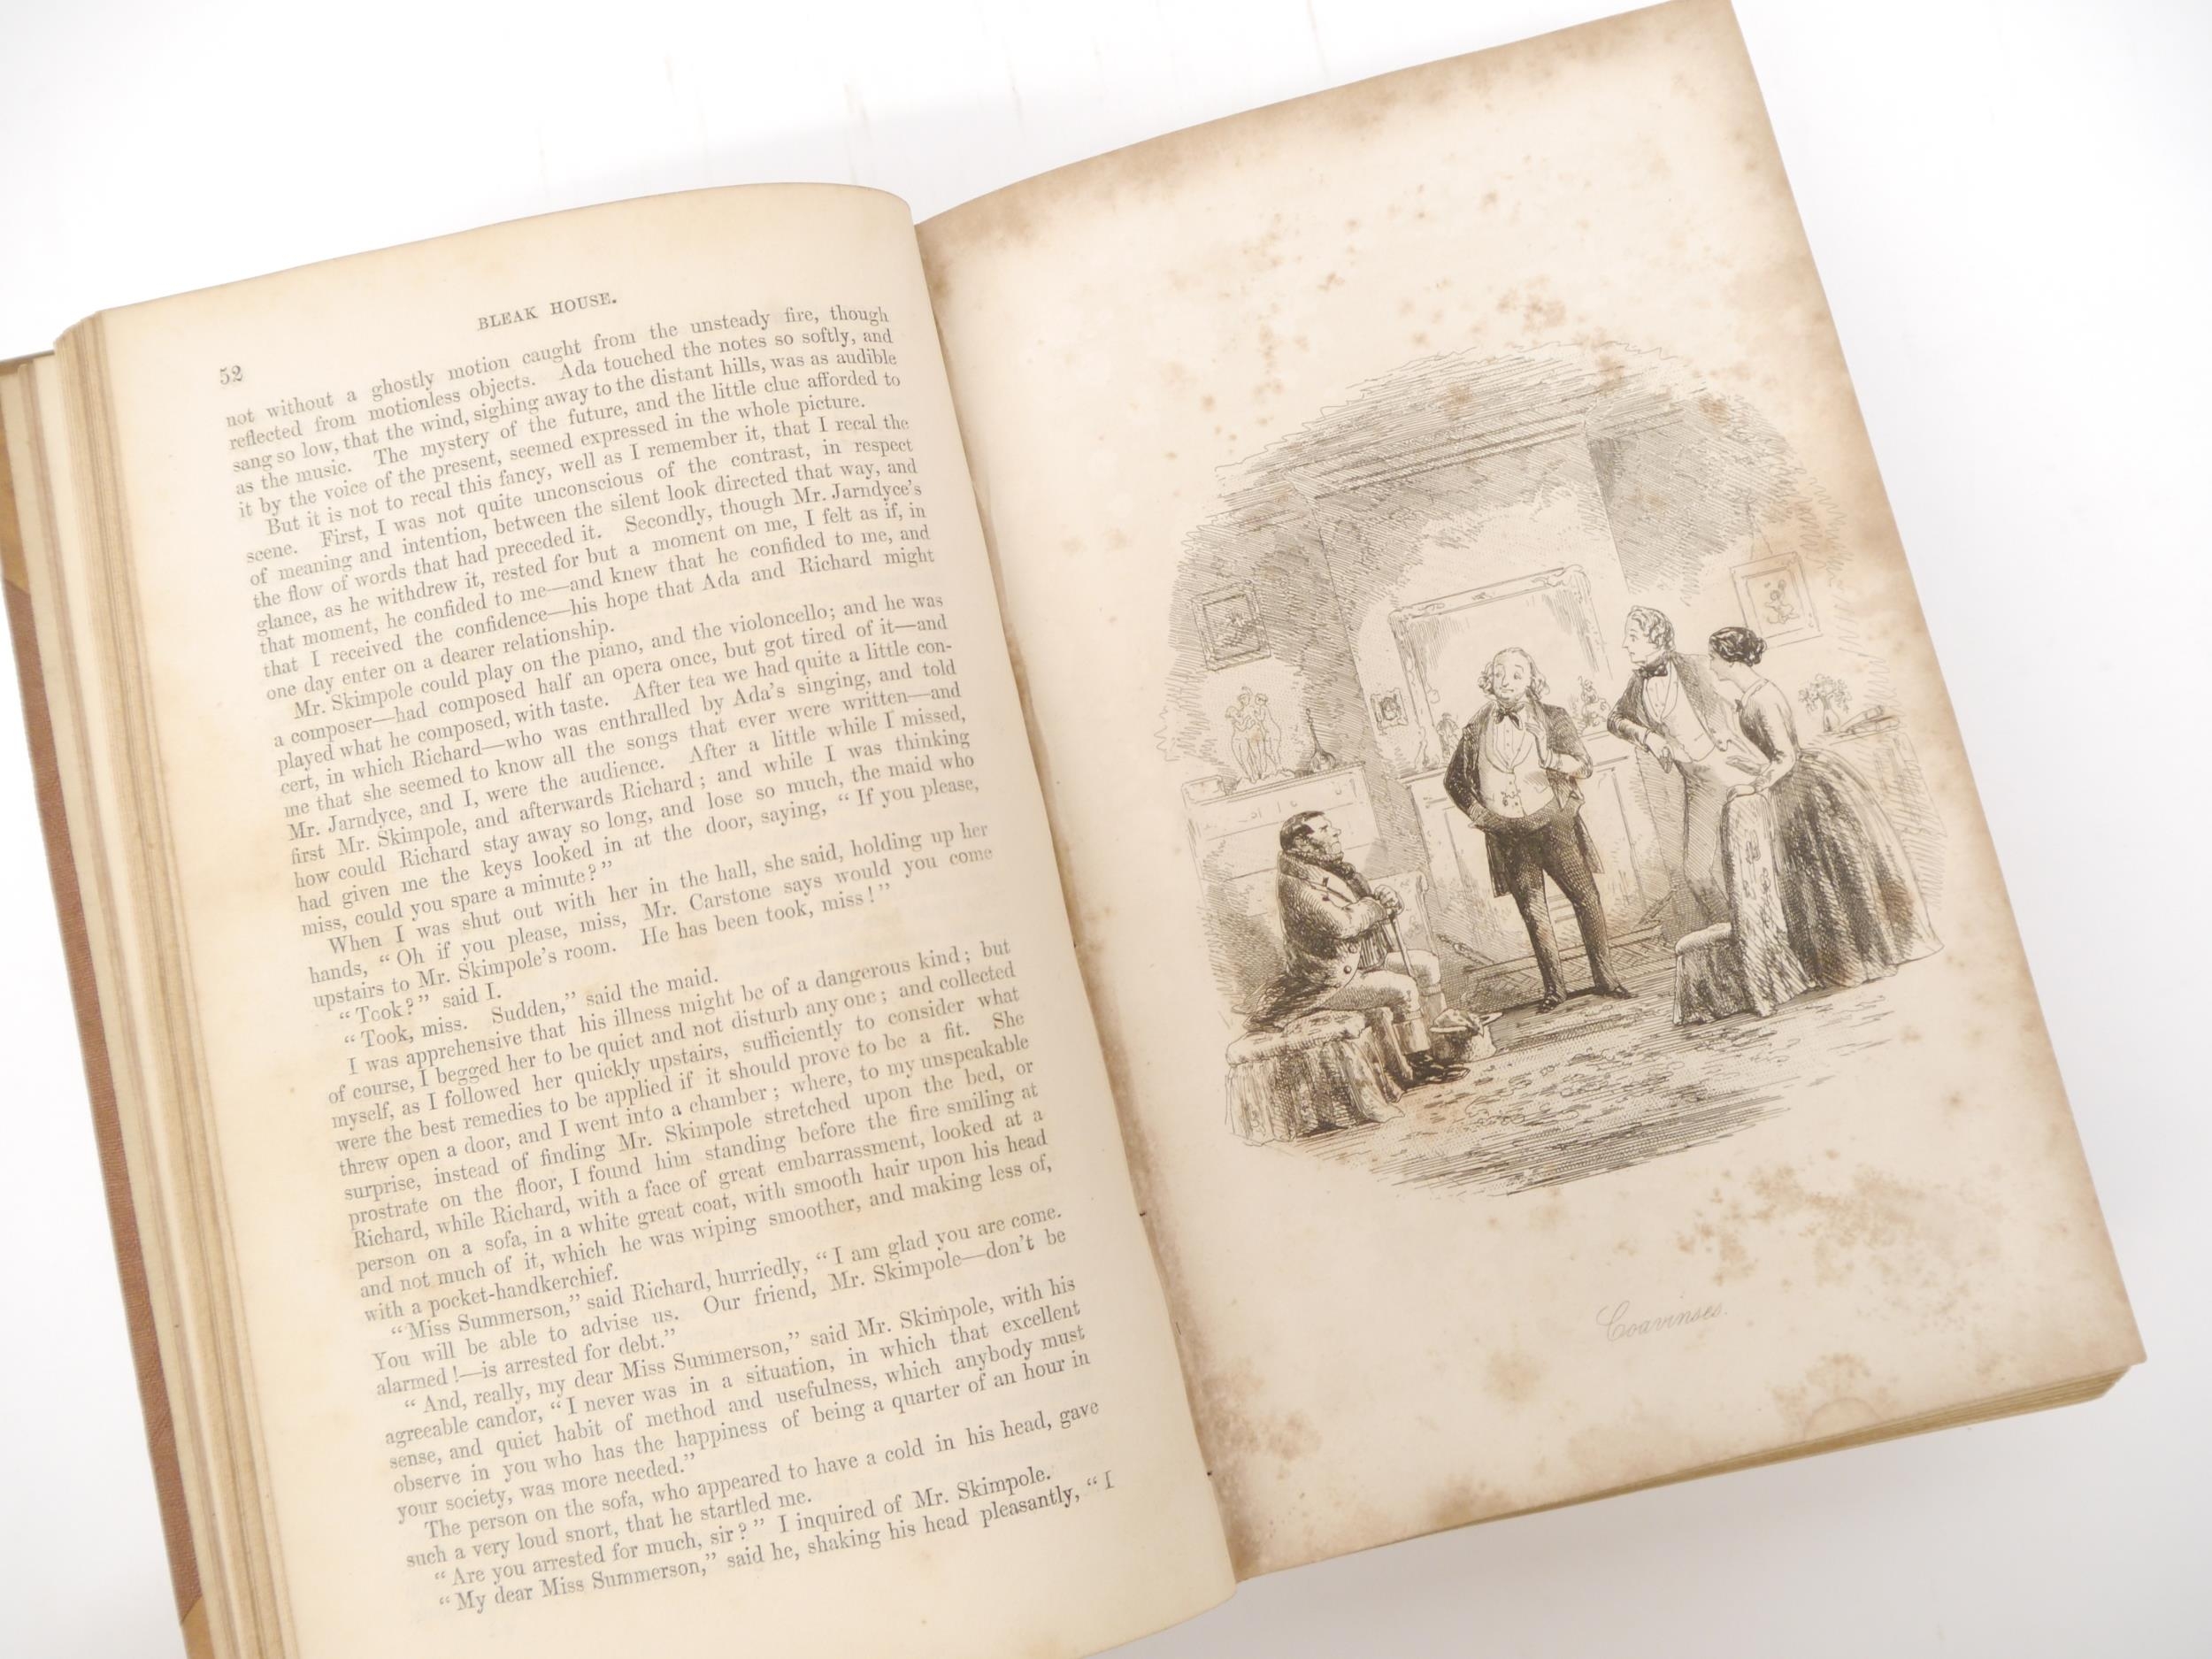 Charles Dickens: 'Bleak House', London, Bradbury & Evans, 1853, 1st edition in book form, conforms - Image 3 of 5